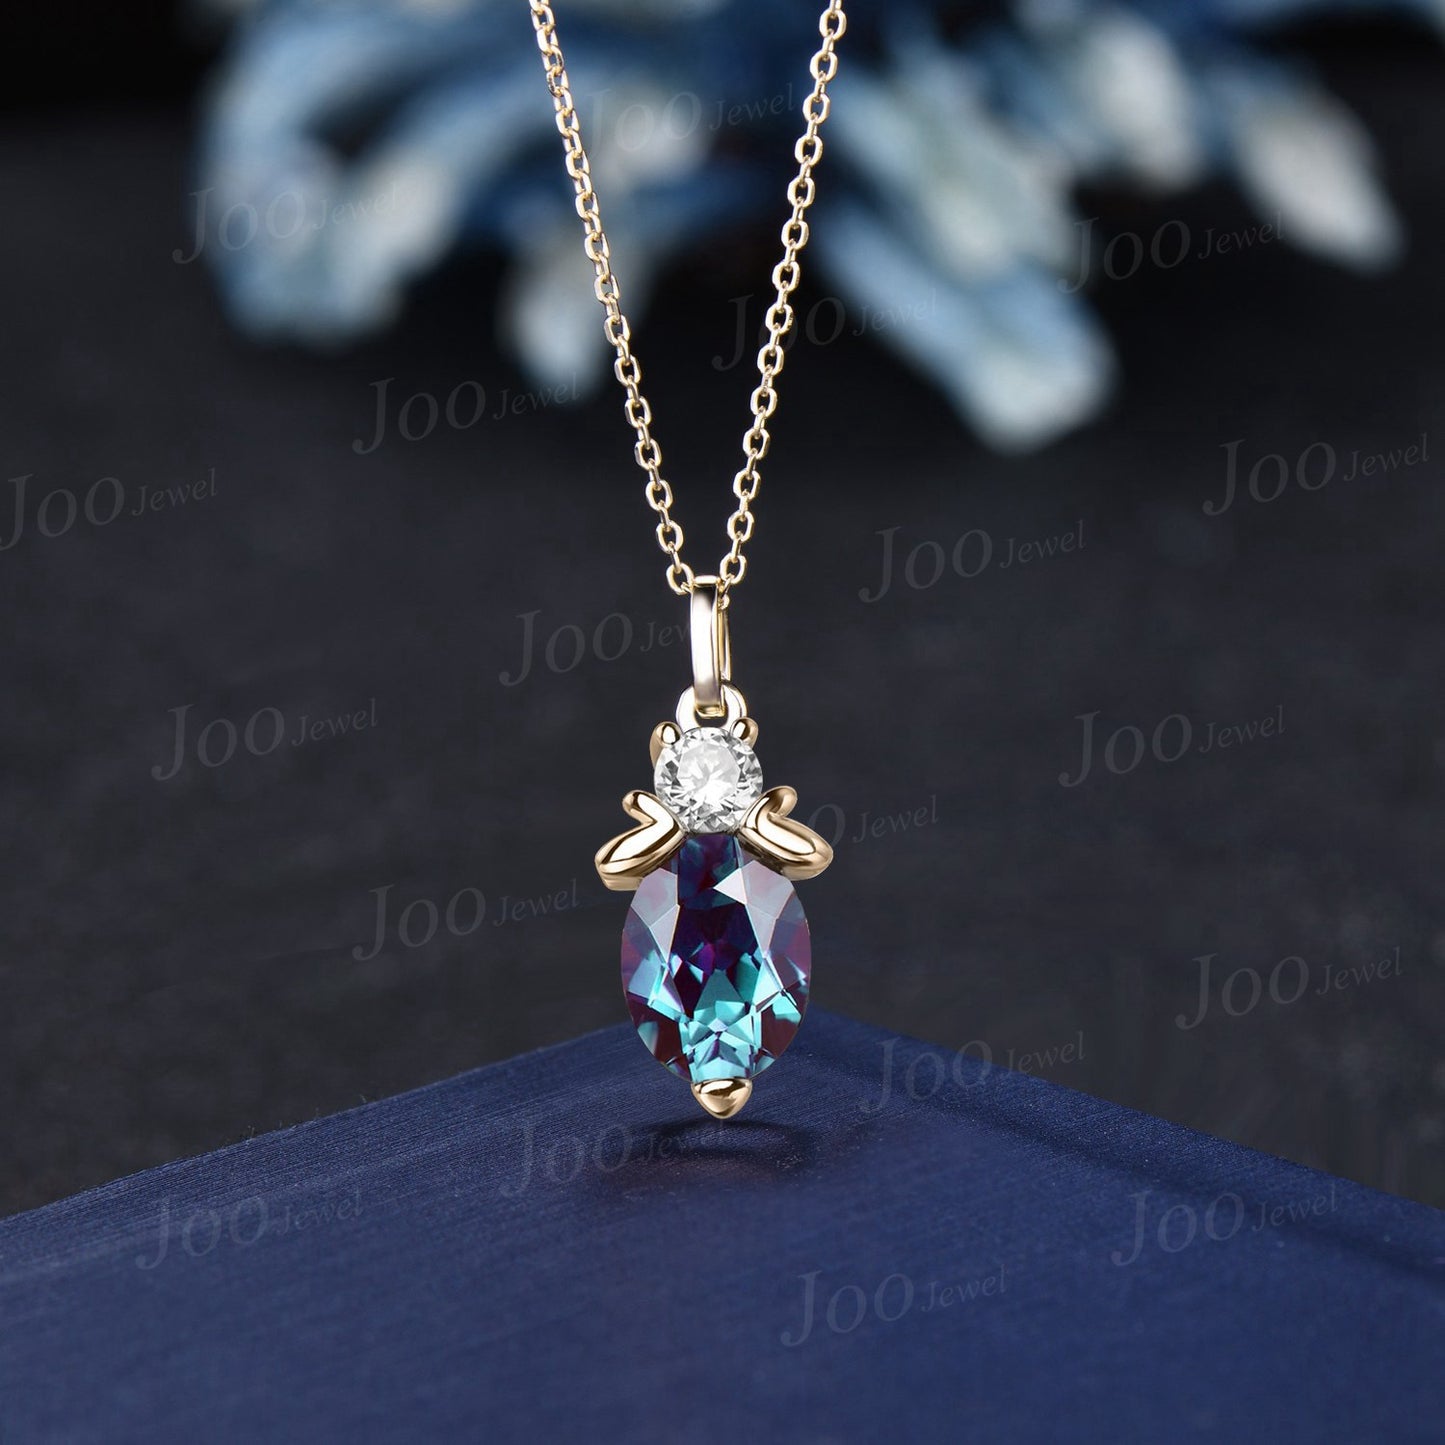 1.5ct Oval Cut Color-Change Alexandrite Moissanite Pendant 14k Rose Gold Honey Bee Necklace Unique June Birthstone Birthday Gift for Women